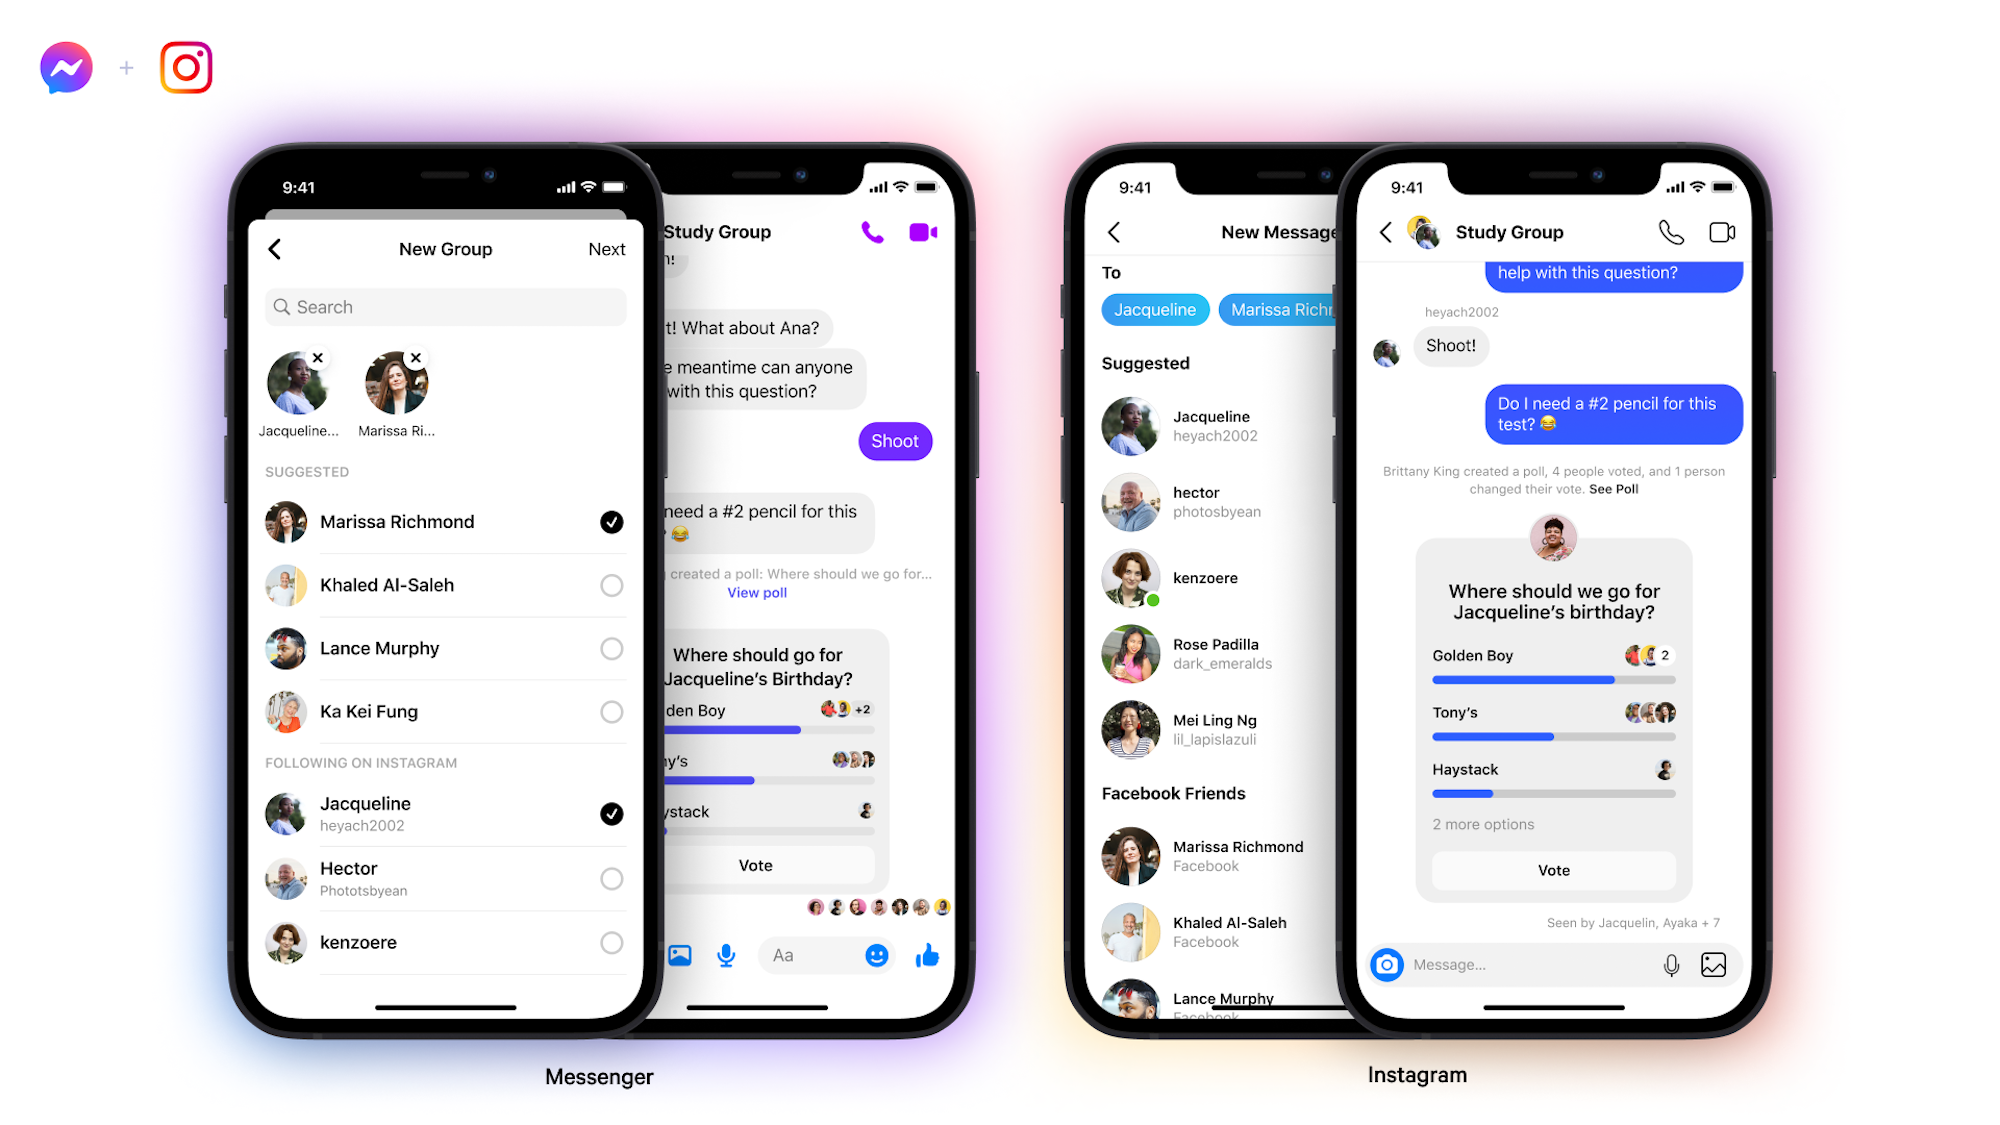 Facebook users can now mix Messenger and Instagram friends in group chats